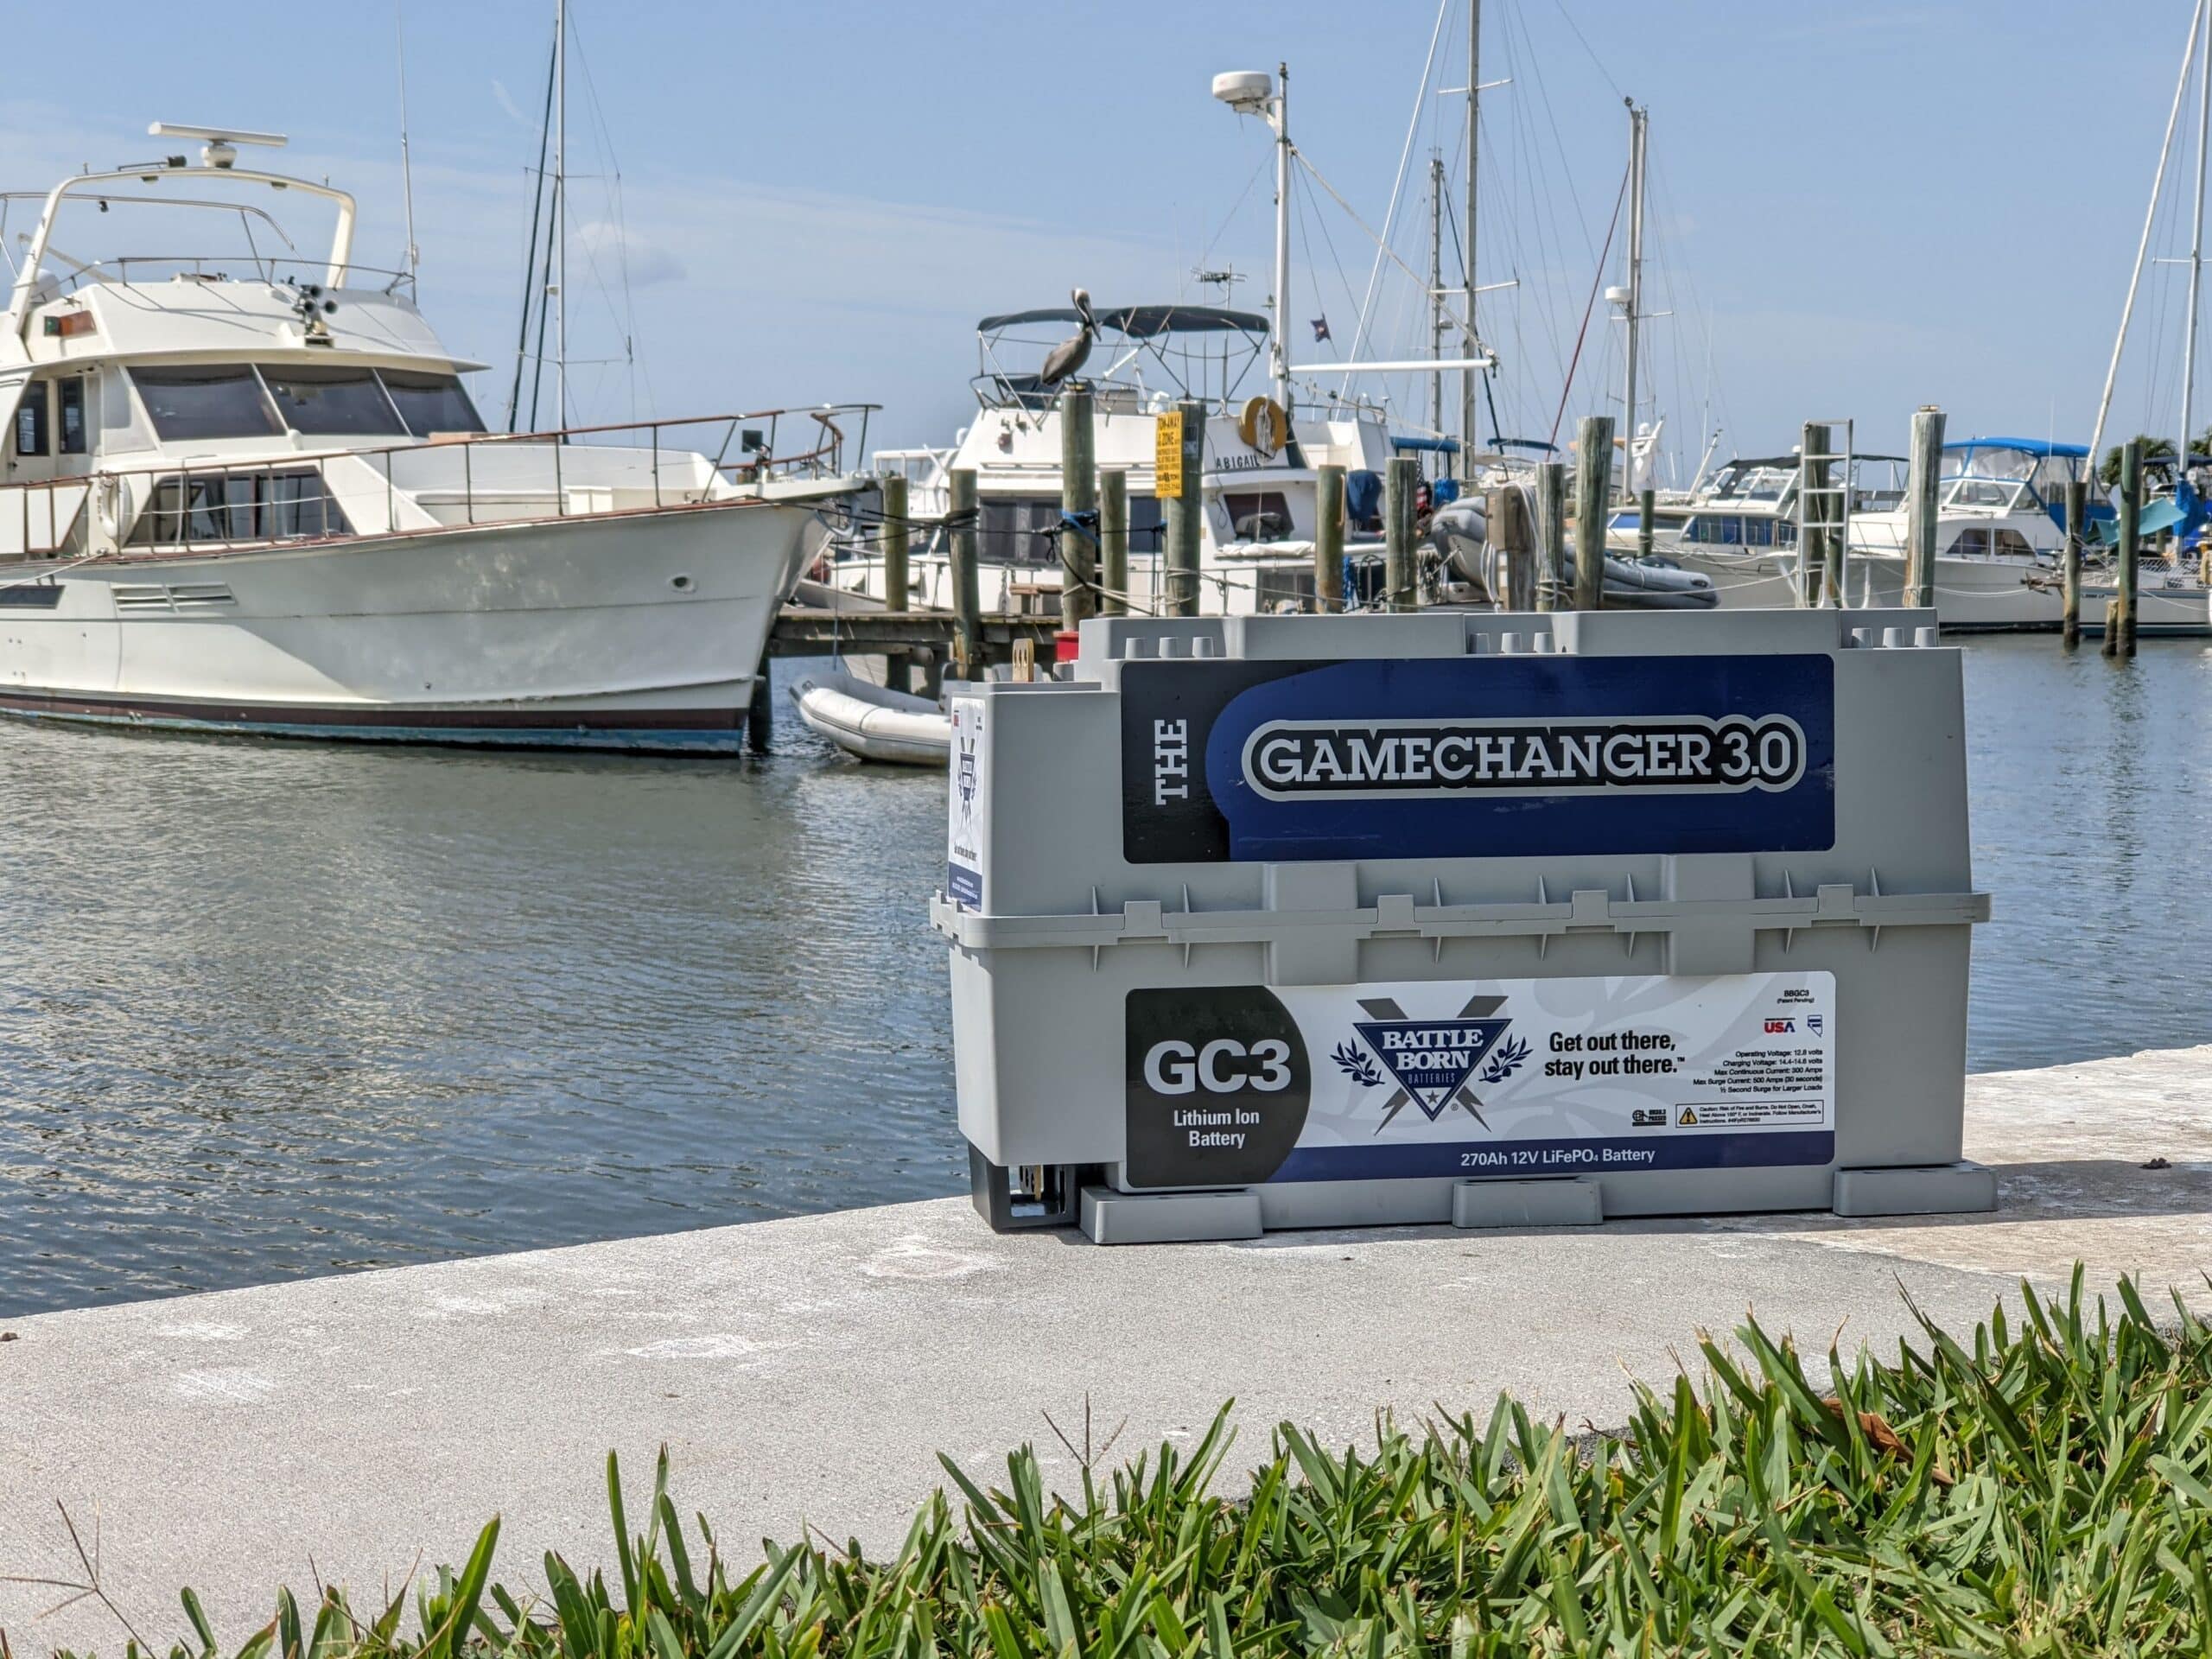 LiFePO4 Battery Chemistry & Why It’s Important for Sailboat Applications